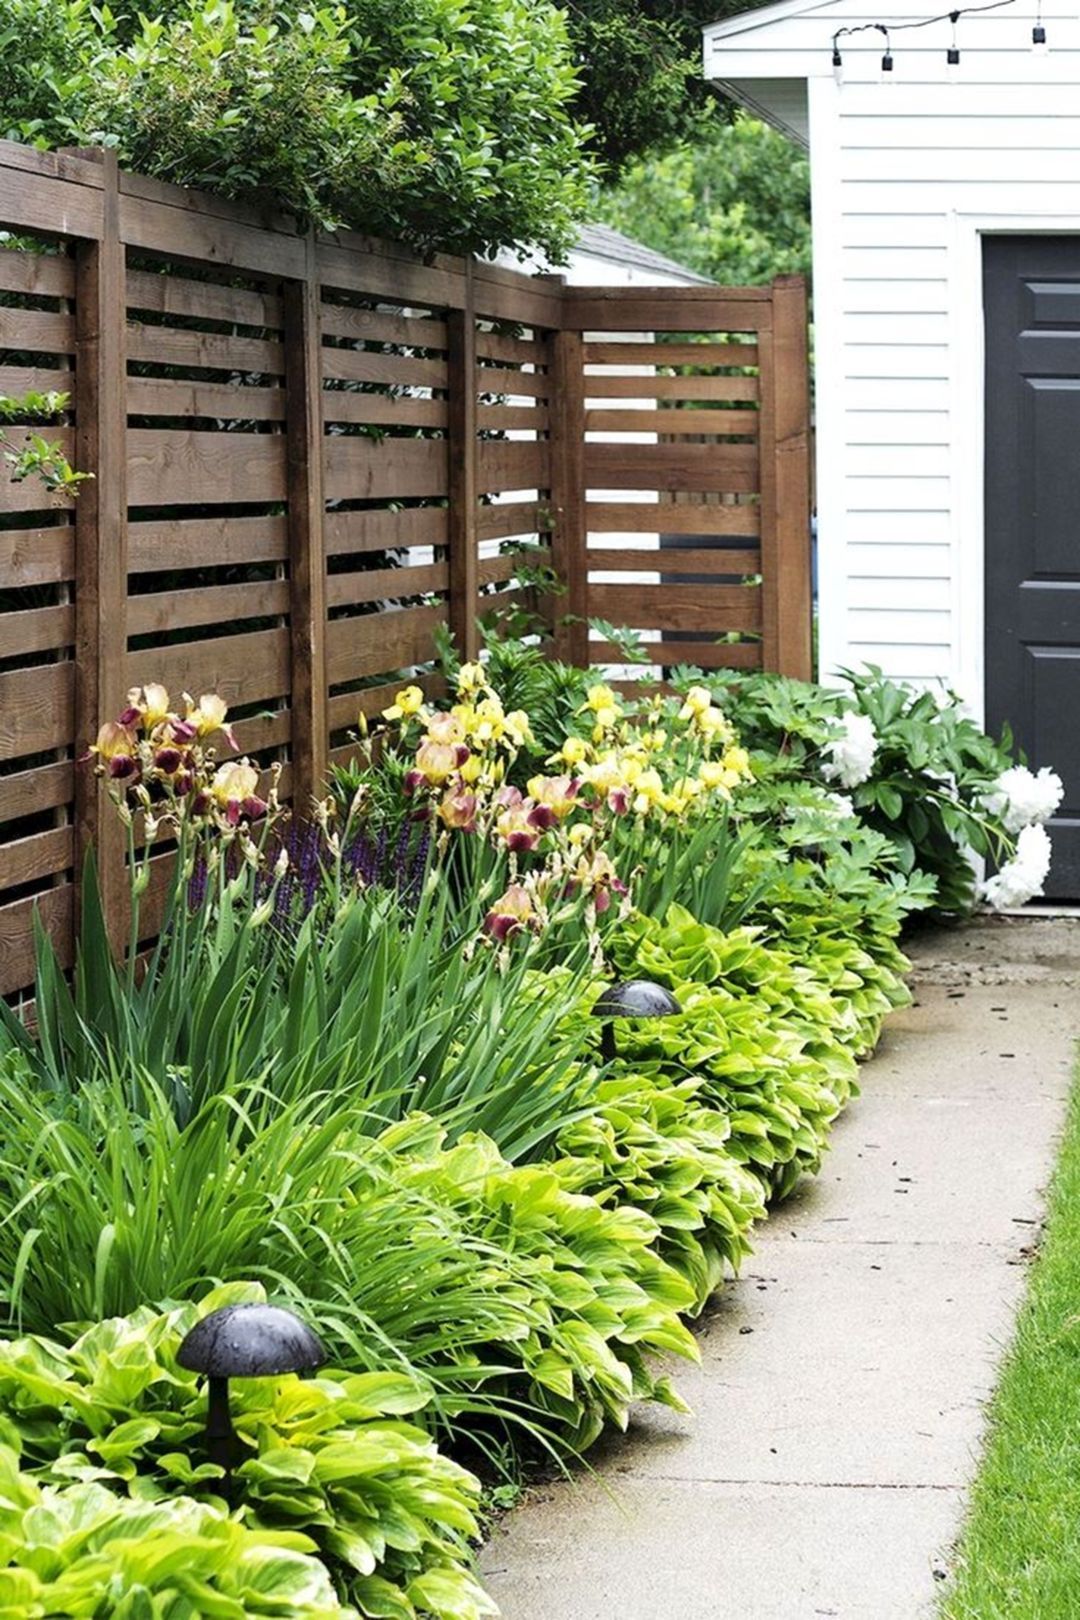 fence.-4 100+ Surprising Garden Design Ideas You Should Not Miss in 2021